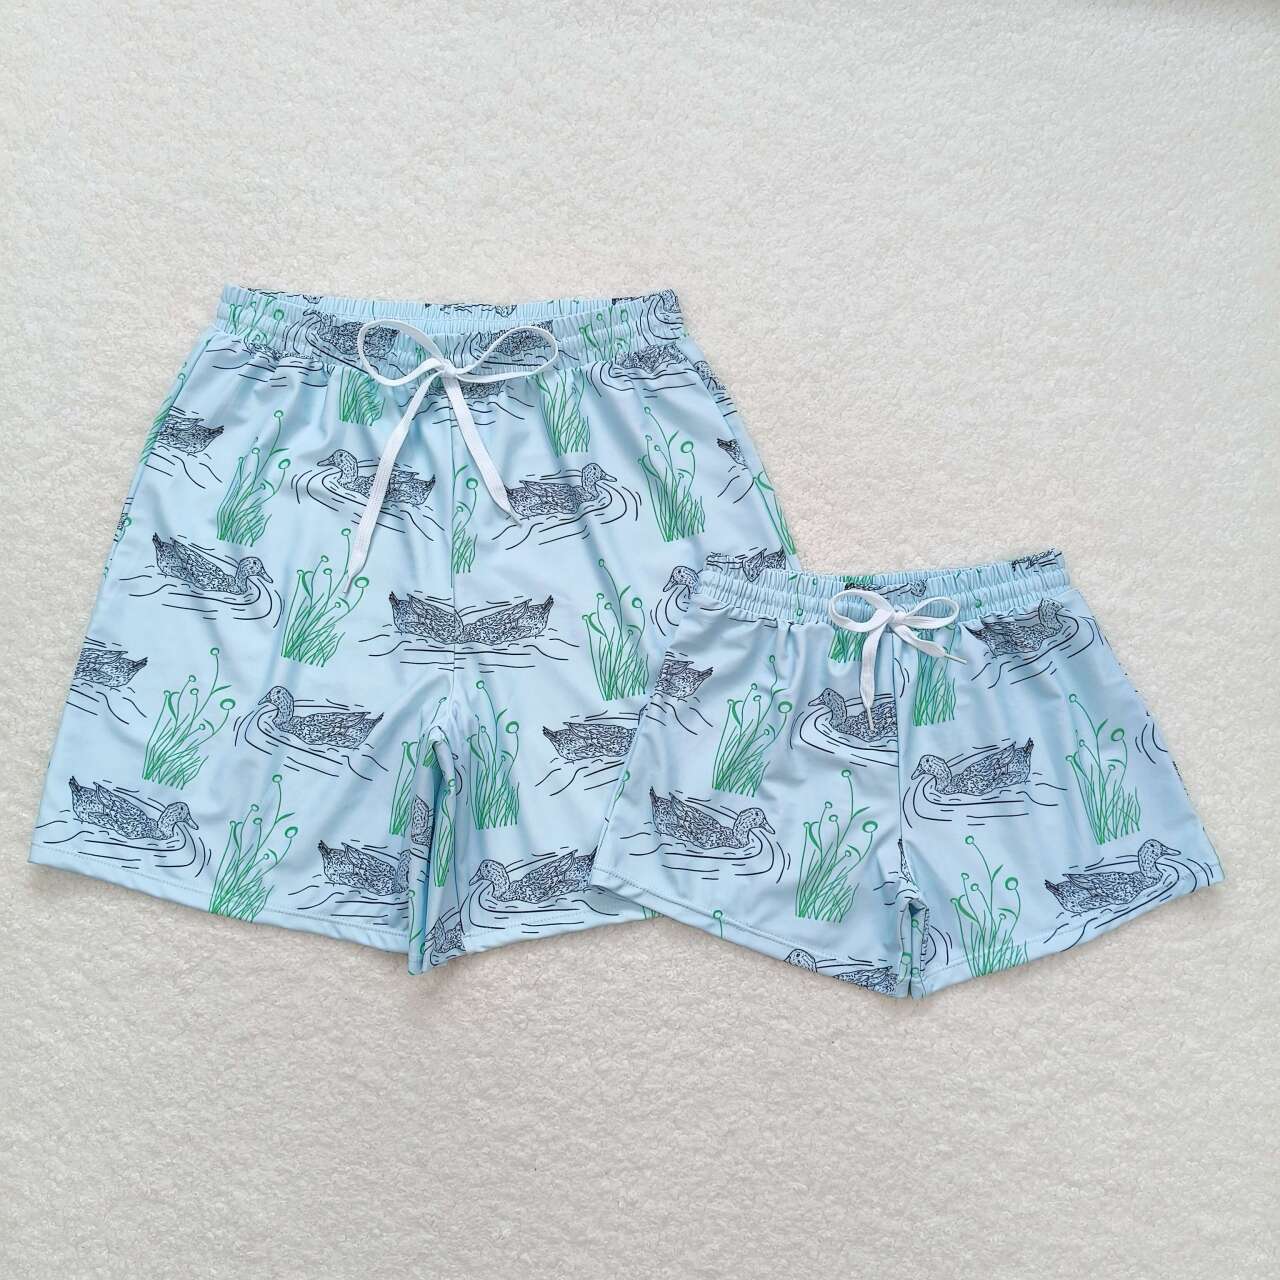 S0359 Aqua swimming trunks for male duck for adults